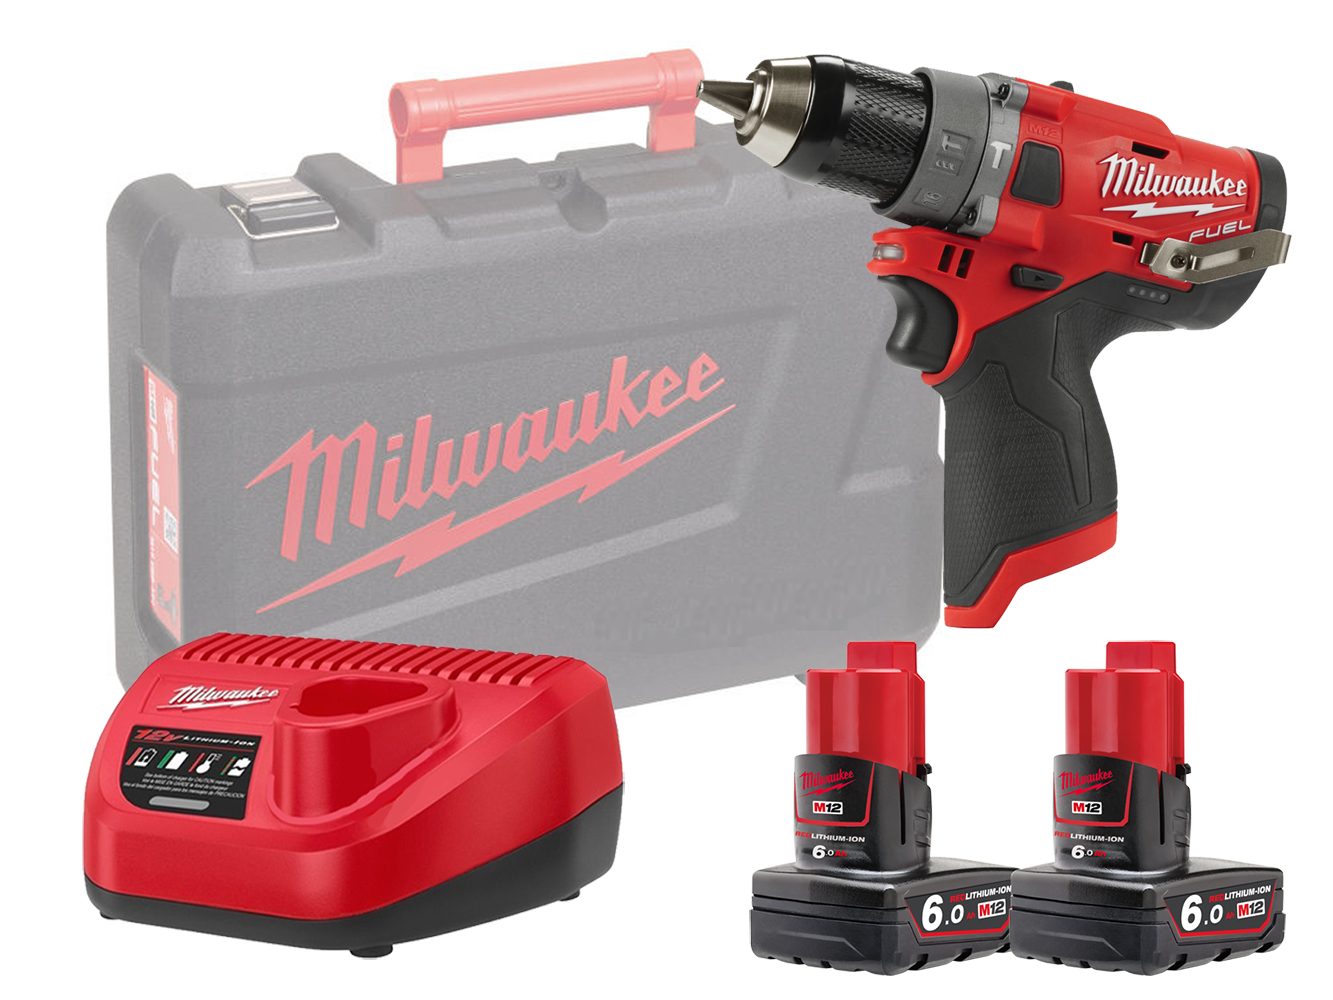 Milwaukee M12FPD 12V Fuel Sub Compact Percussion Drill (Combi Drill) 2-Speed - 6.0Ah Pack